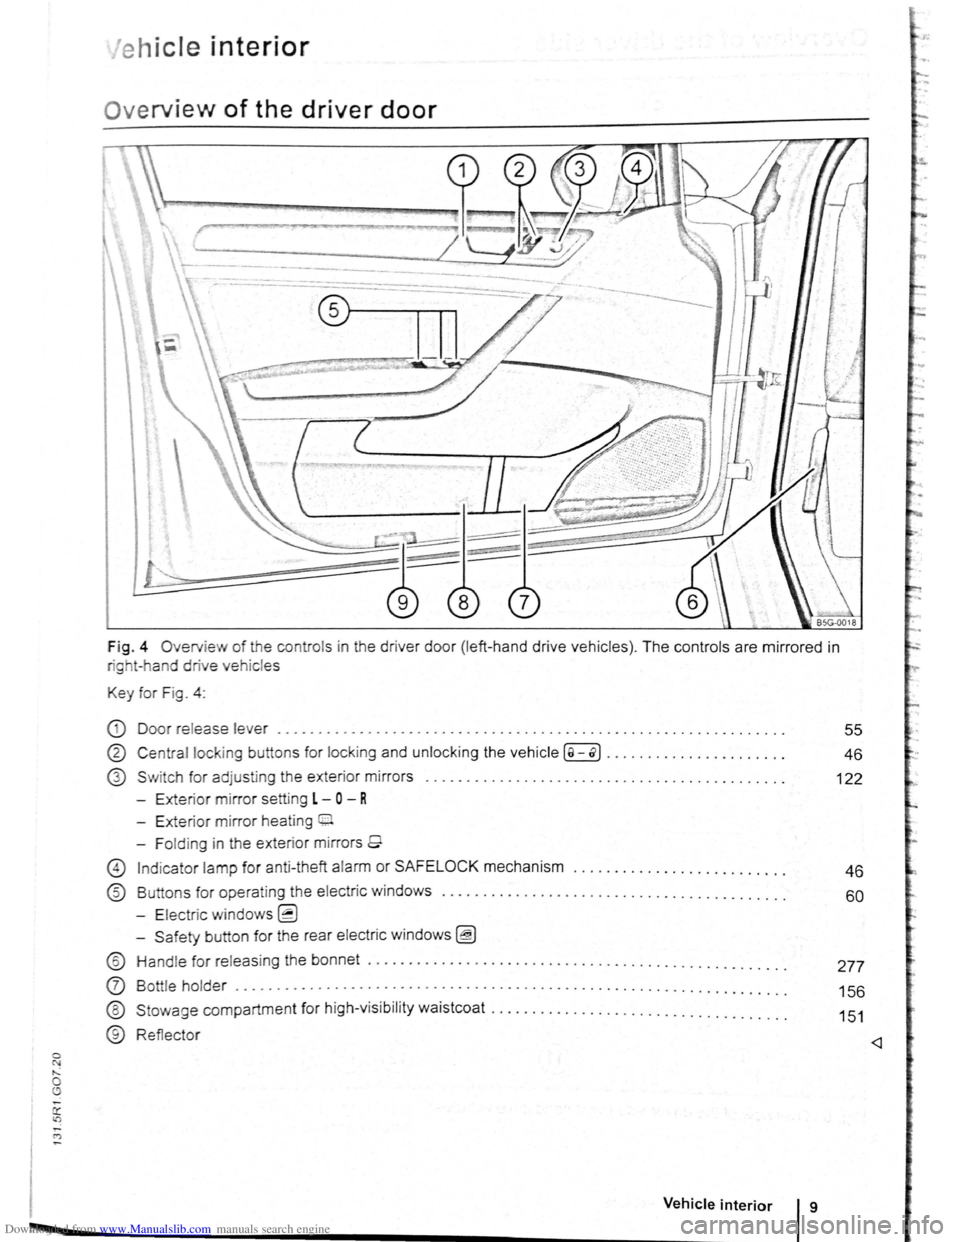 VOLKSWAGEN GOLF 2011  Owner´s Manual Downloaded from www.Manualslib.com manuals search engine 0 N ,..; 0 
e h ic le interior 
Ov erview of the driver door 
Fig . 4 Overv ie w of the  contro ls  in  the drive r doo r (left -ha nd  dr ive